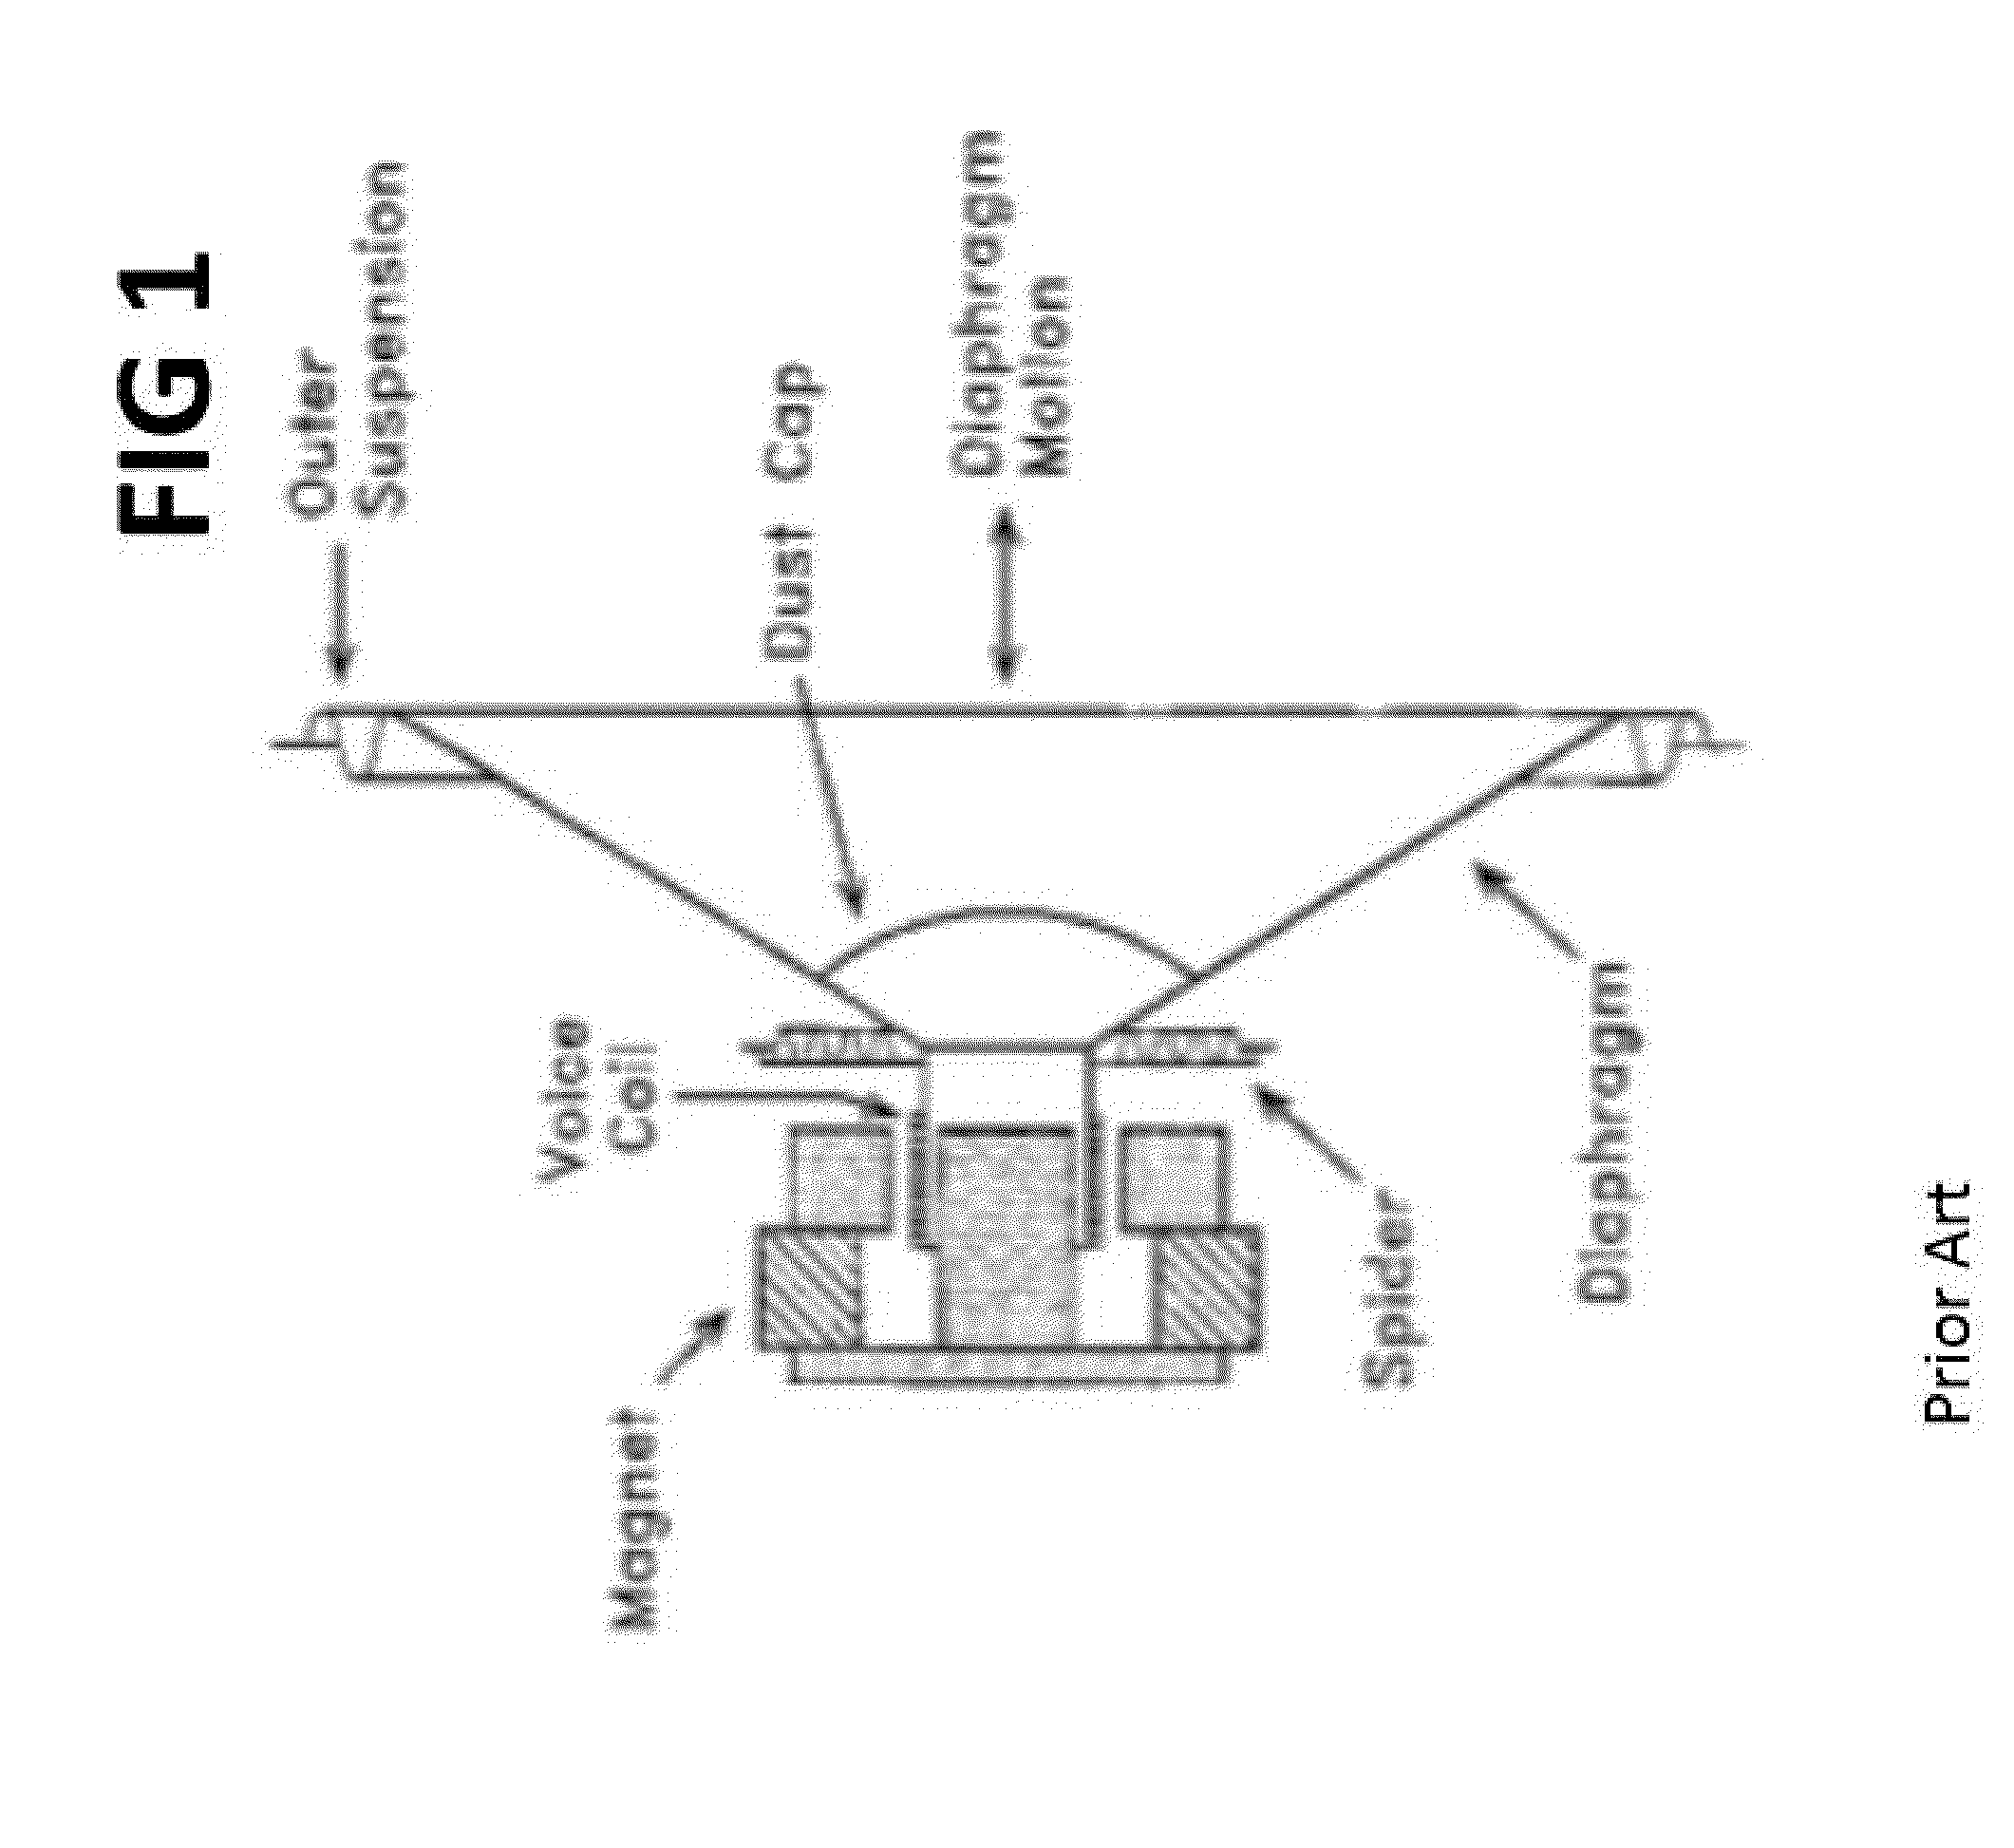 Acoustic wave generator employing fluid injector